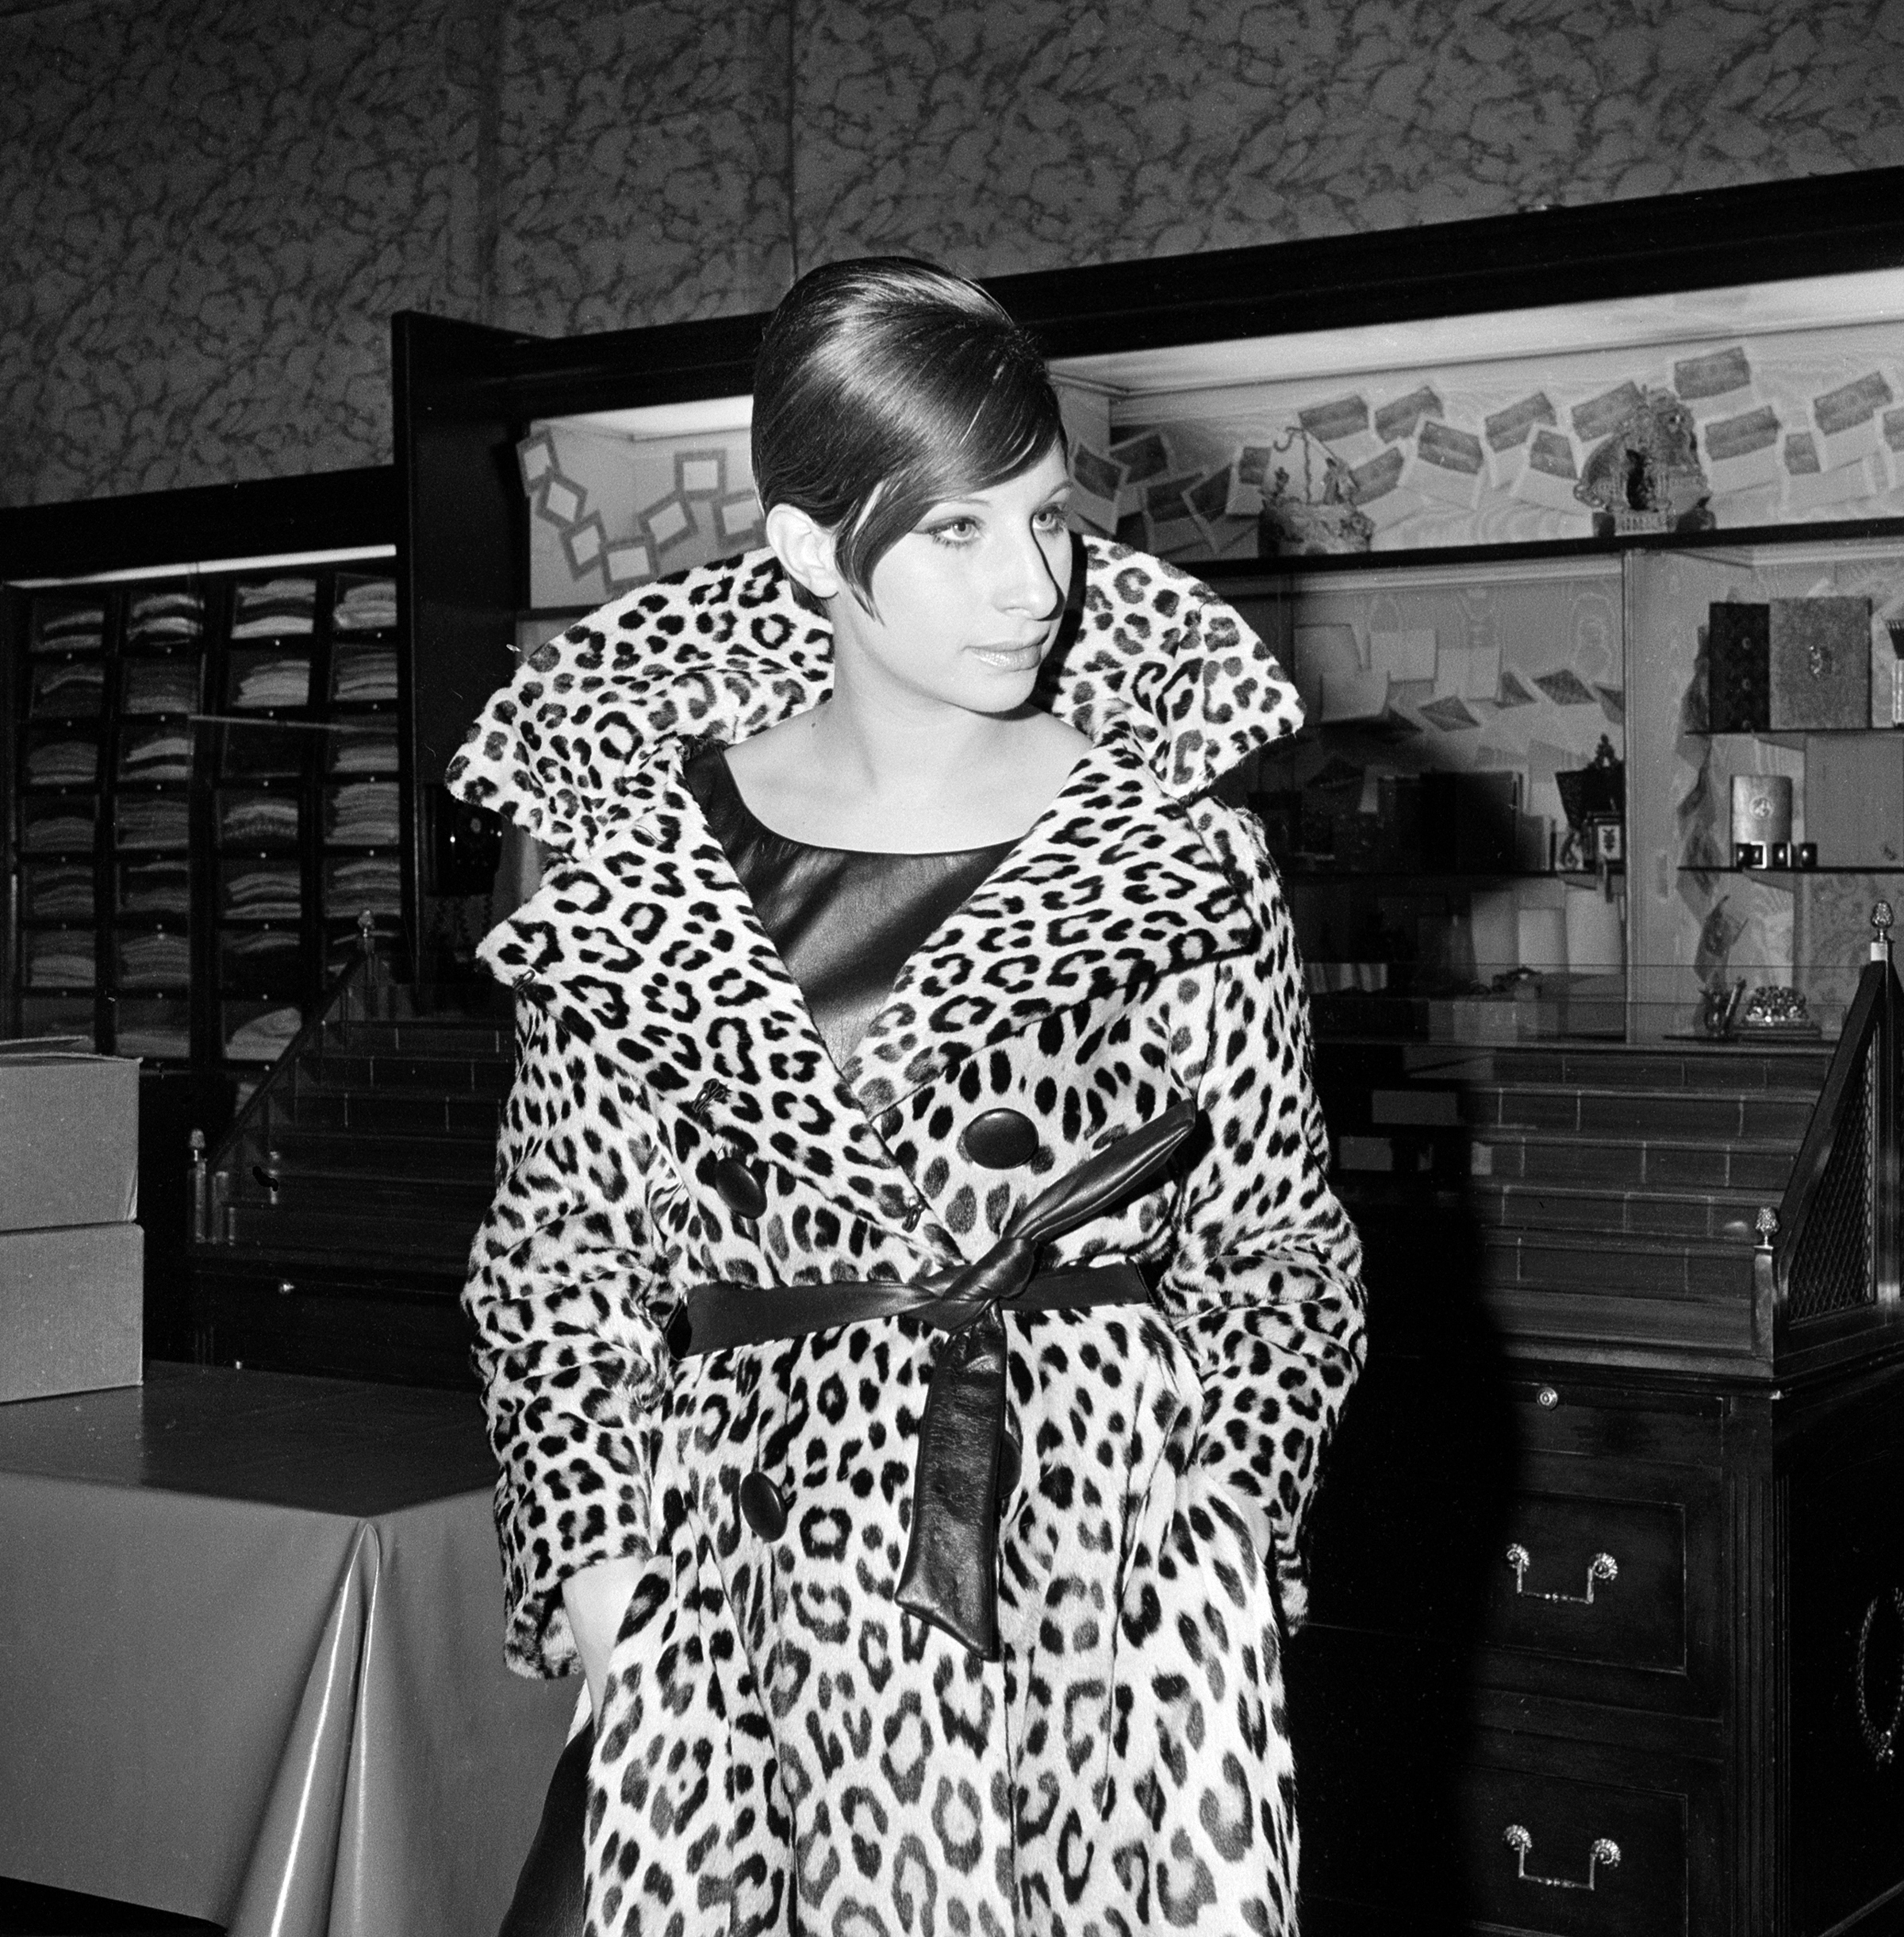 “My Name Is Barbra” (The Barbra Streisand television special that aired on CBS, April 28, 1965). Taping a scene inside the Fifth Avenue New York City department store, Bergdorf Goodman